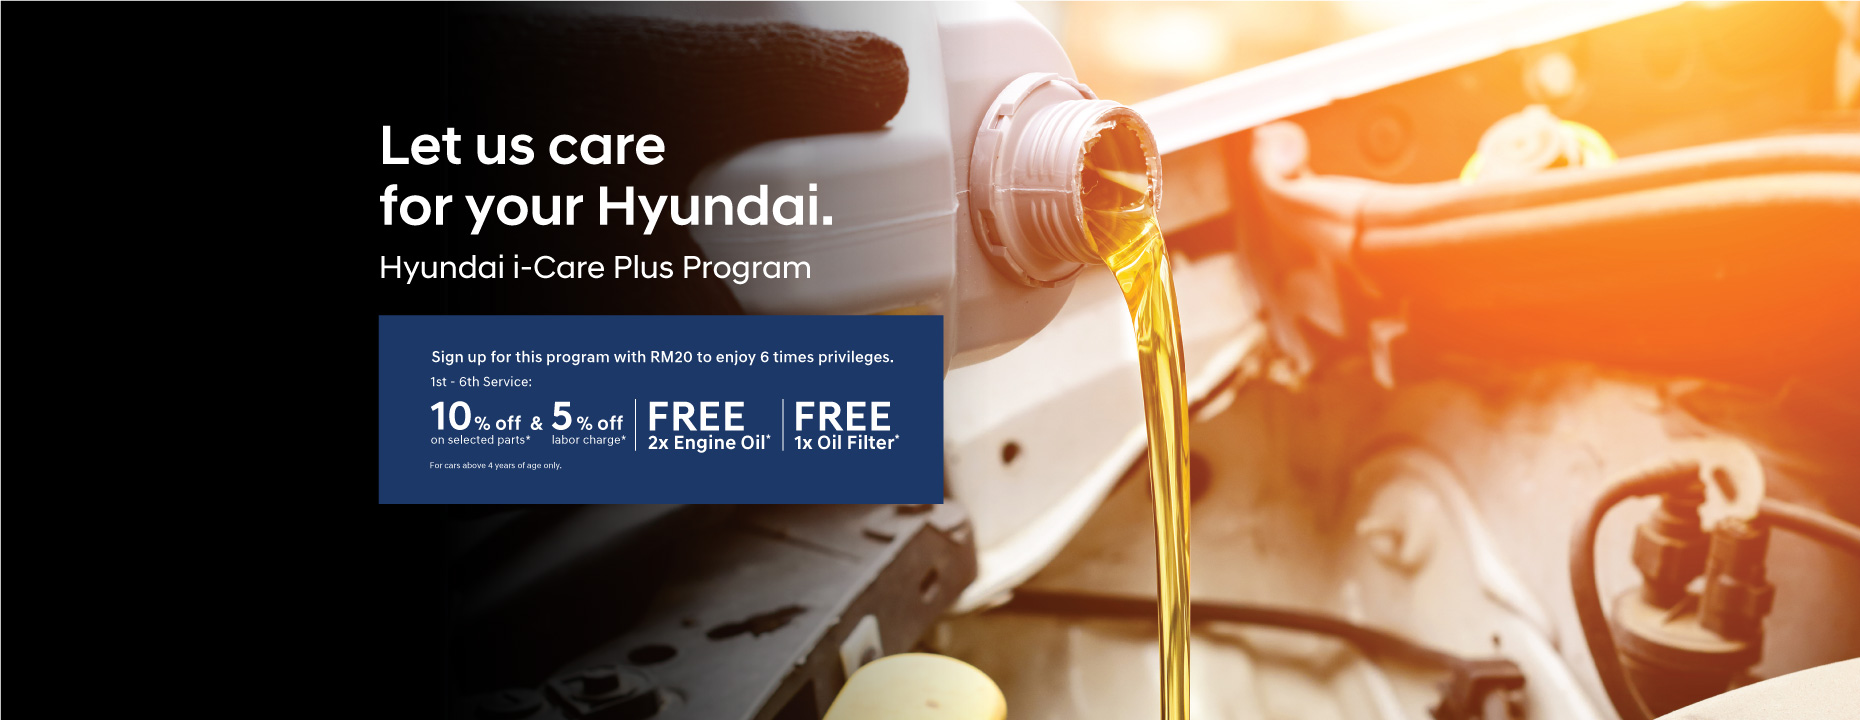 Hyundai i-Care Plus Program | Sign up for this program with RM20 to enjoy 6 times privileges. 1st - 6th Service : 10% off on selected parts* and 5% off labor charge*. | Free 2x Engine Oil* | Free 1x Oil Filter* | Terms & Conditions apply.